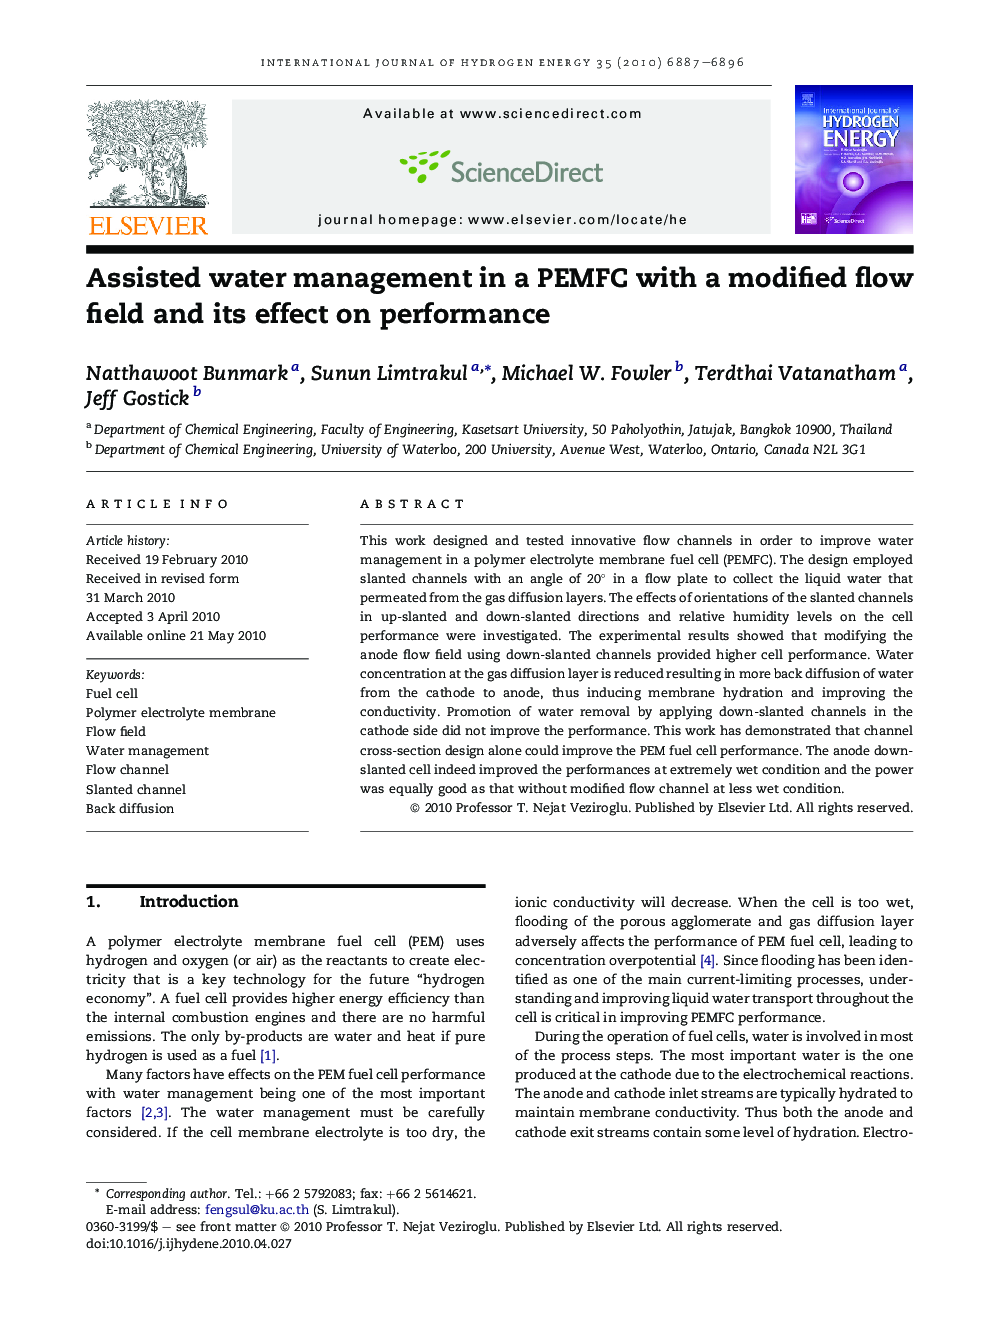 Assisted water management in a PEMFC with a modified flow field and its effect on performance